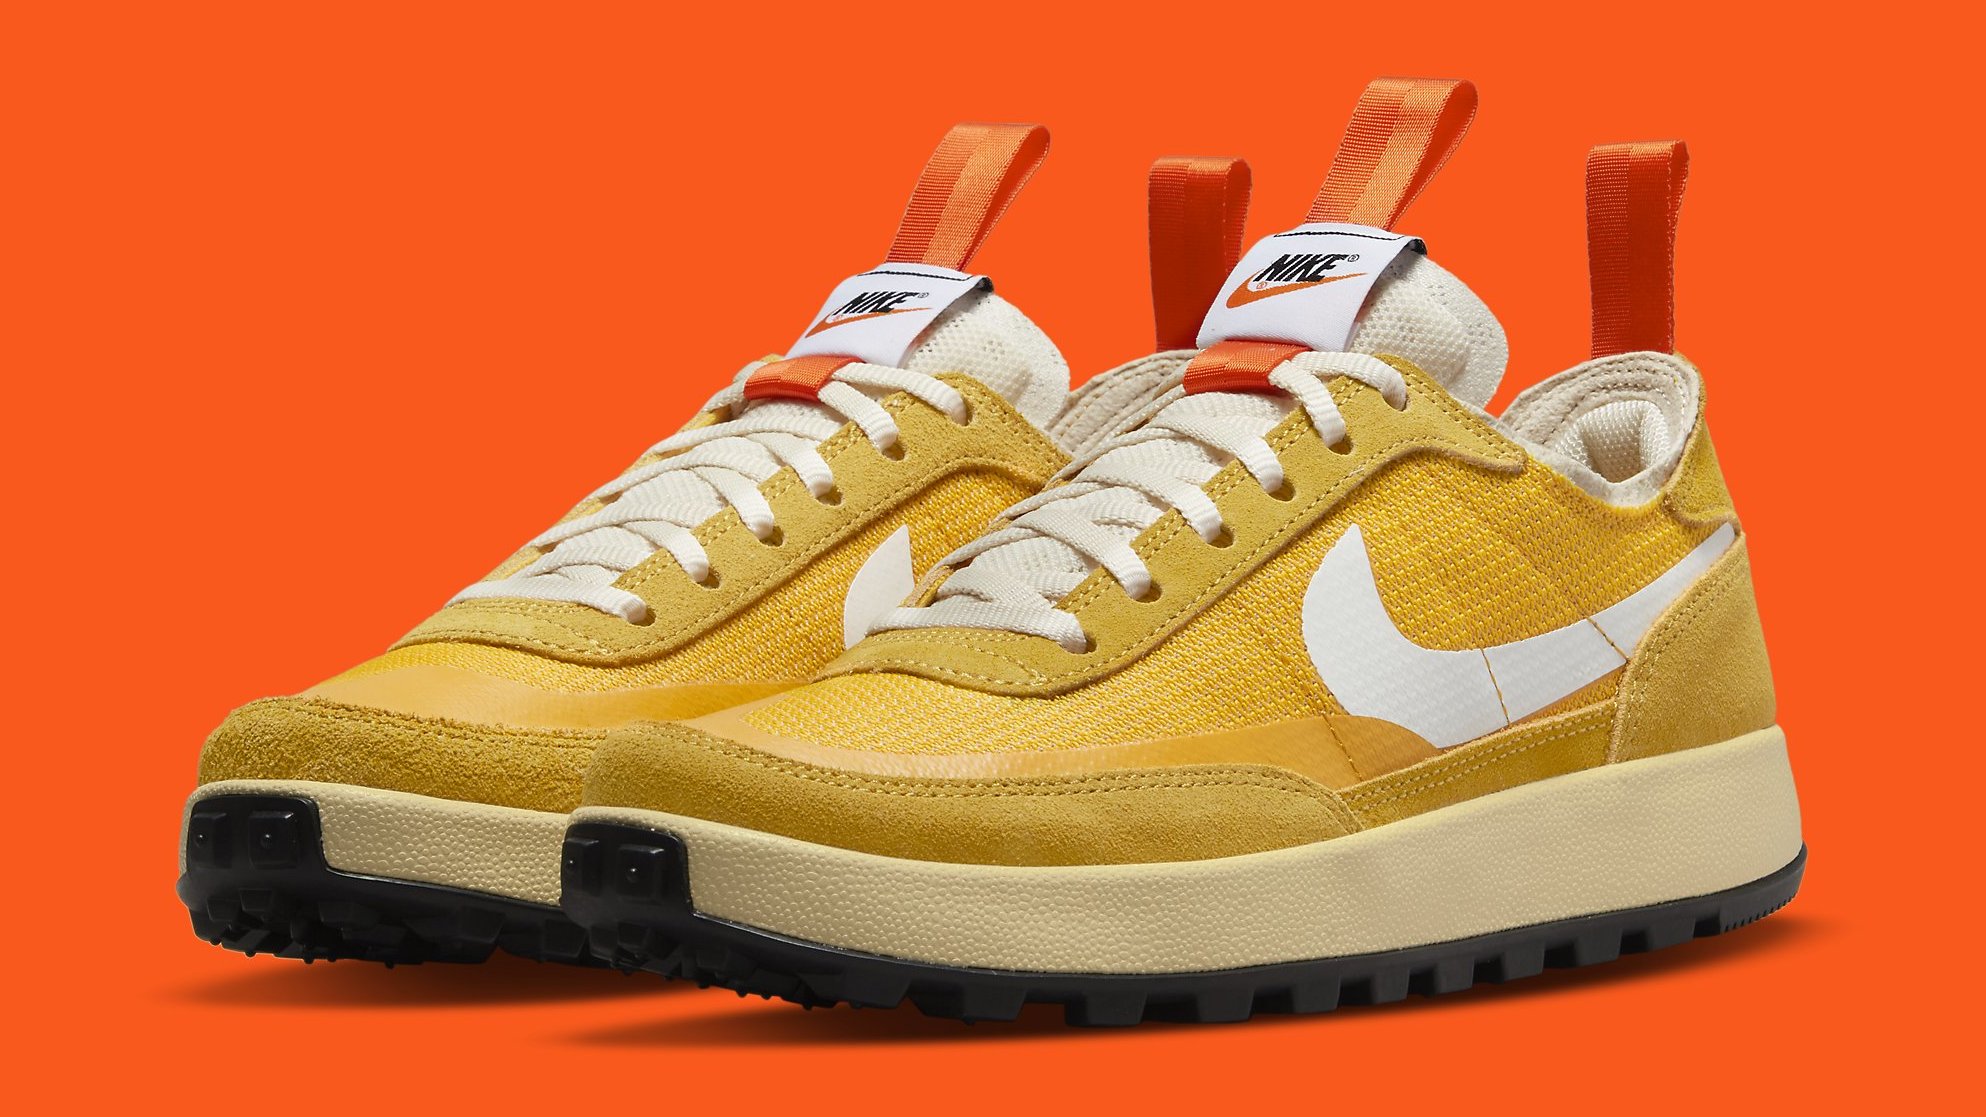 How to Style the Tom Sachs x Nike General Purpose Shoe - Sneaker